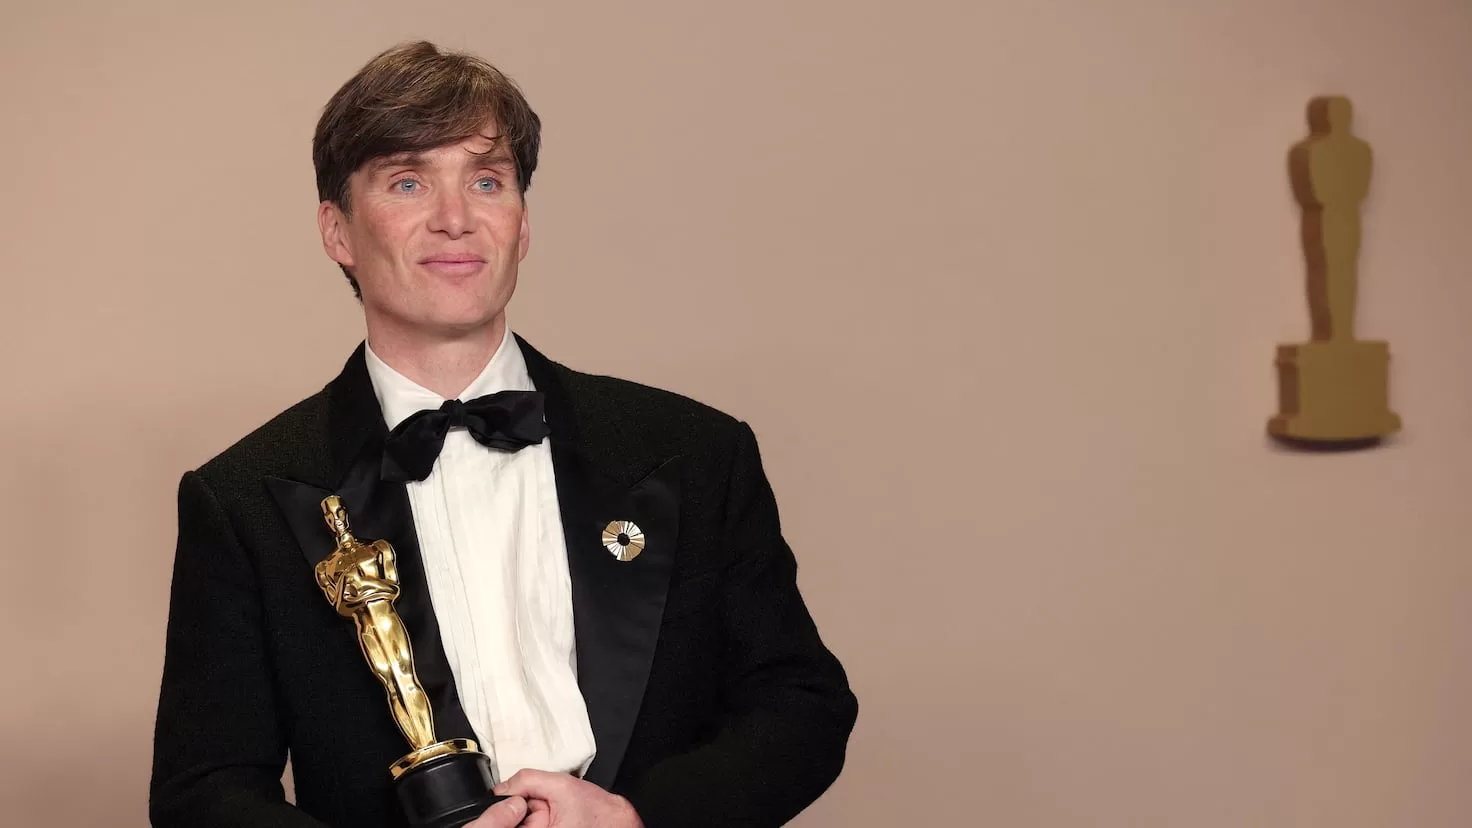 This is the personal life of Cillian Murphy, the Oscar-winning Oppenheimer actor
